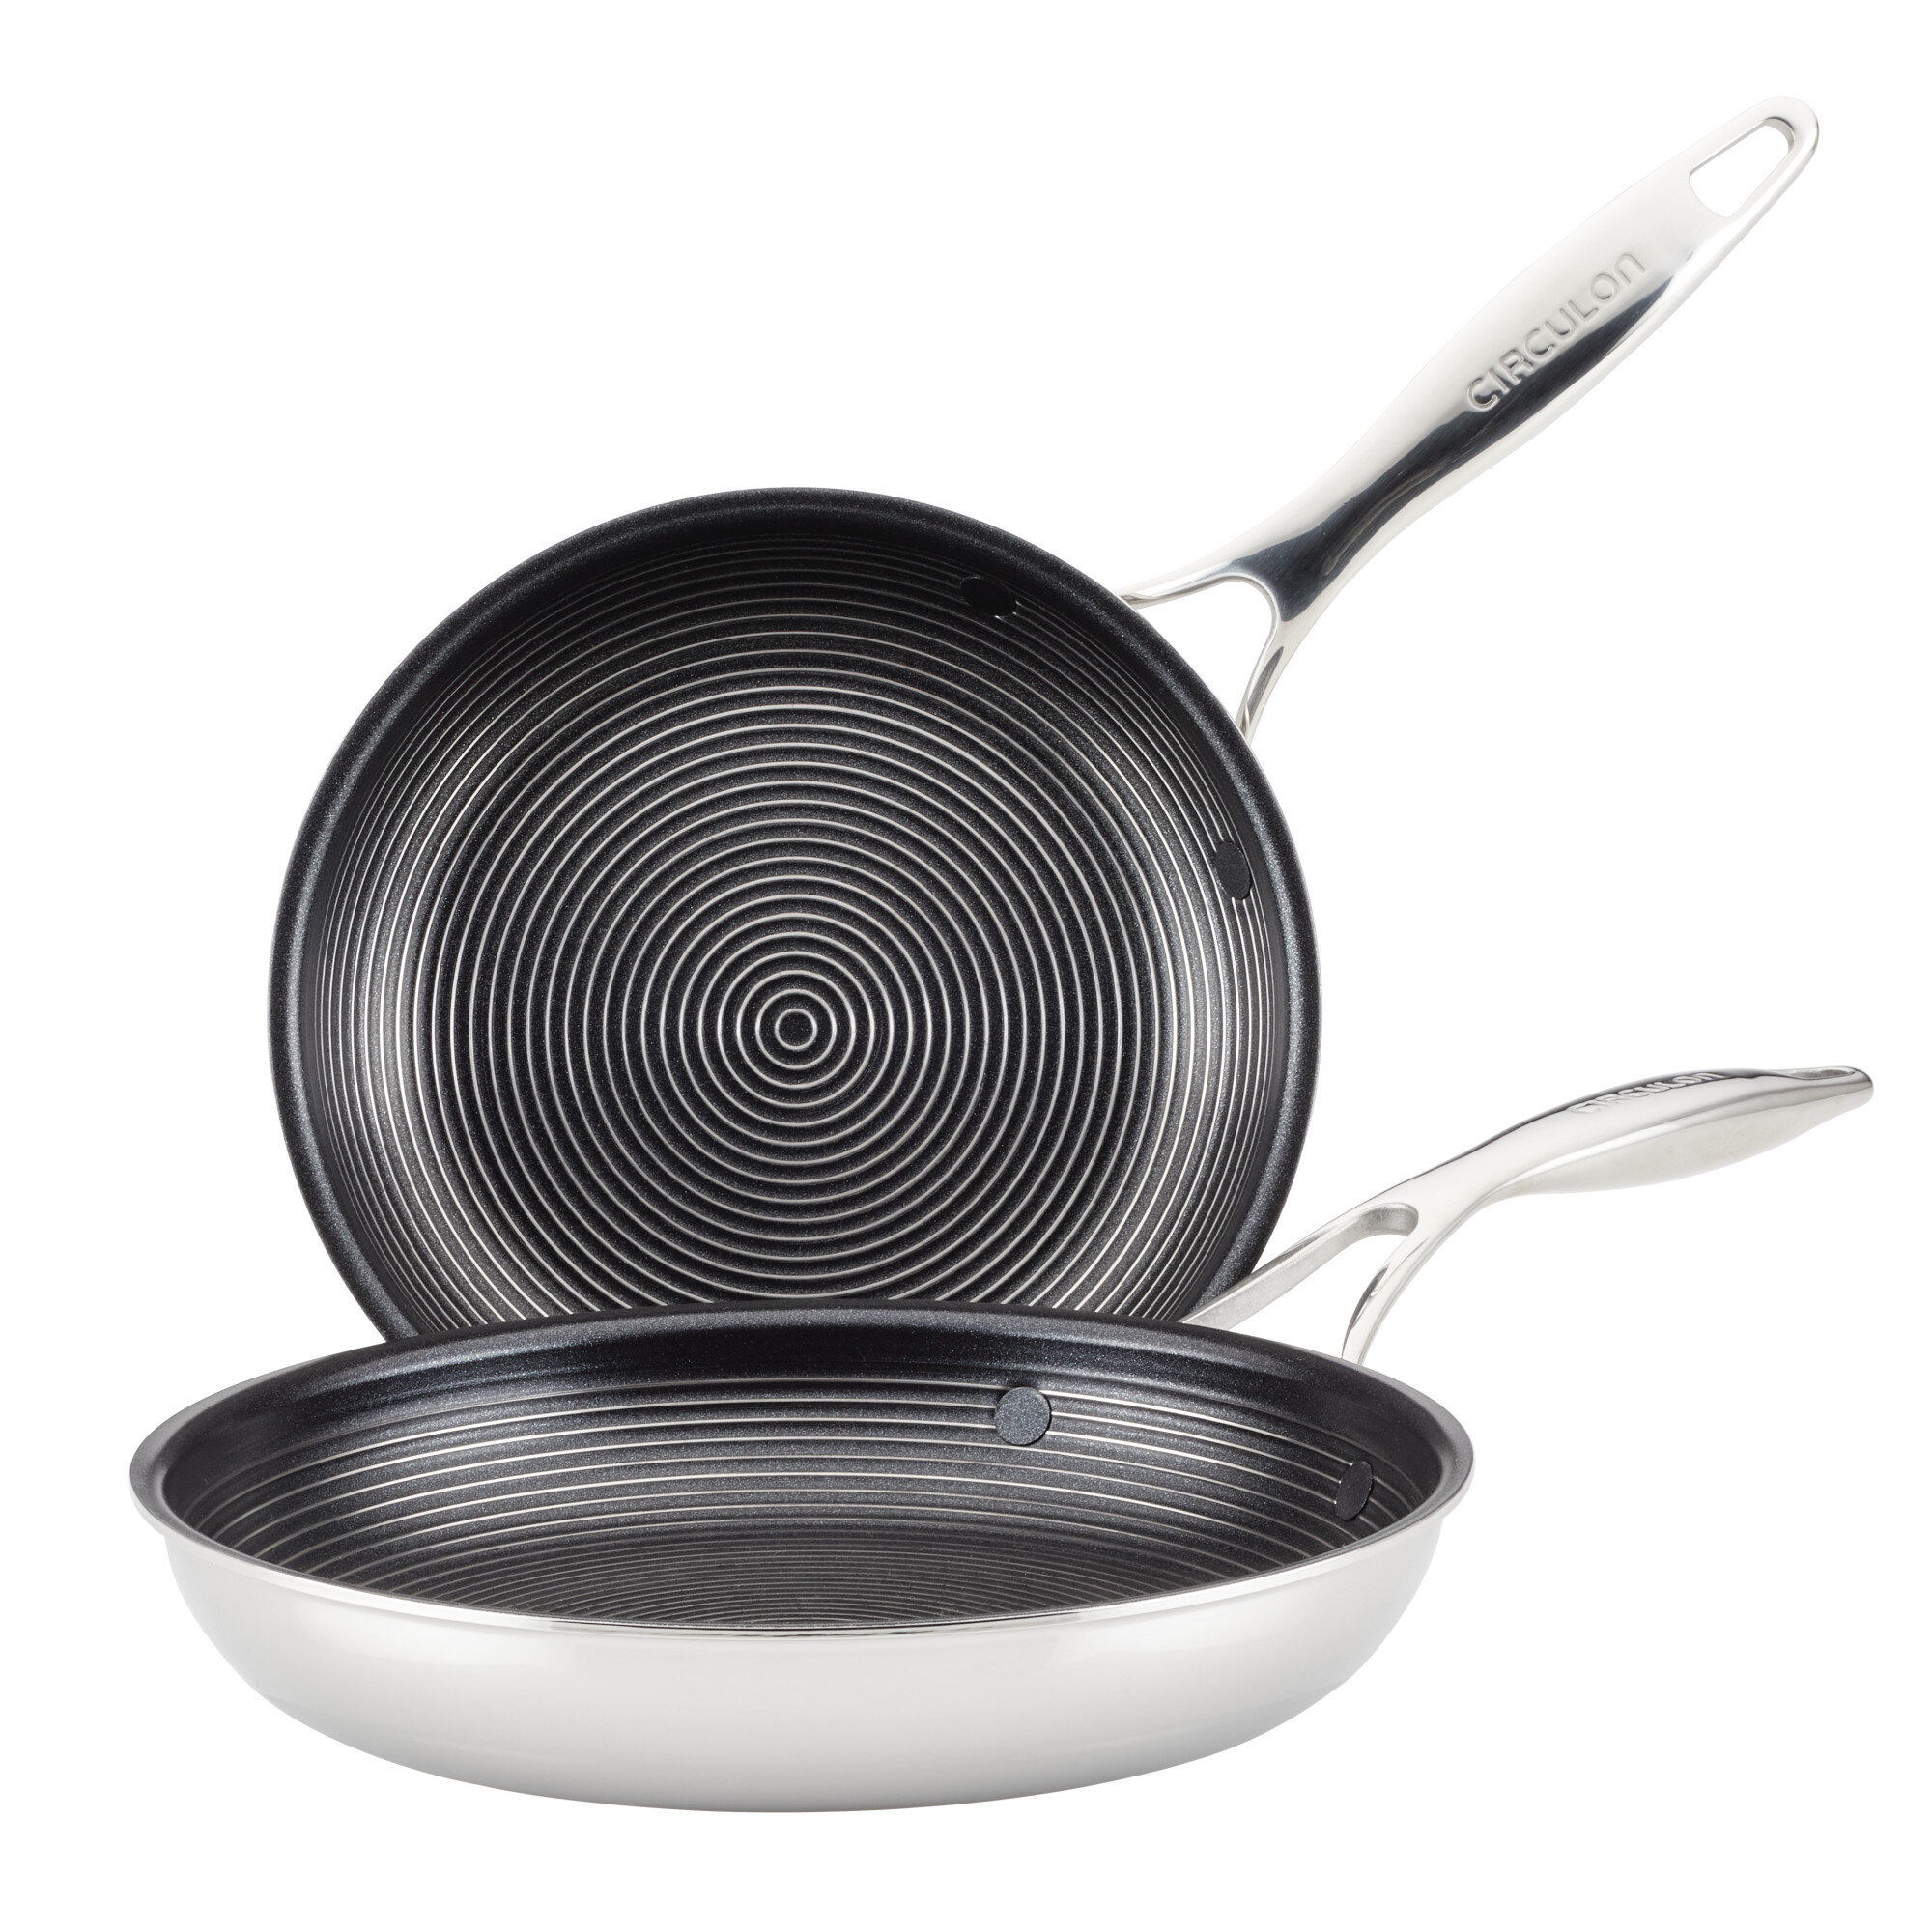 12 Hybrid Stainless Steel Nonstick Covered Frying Pan